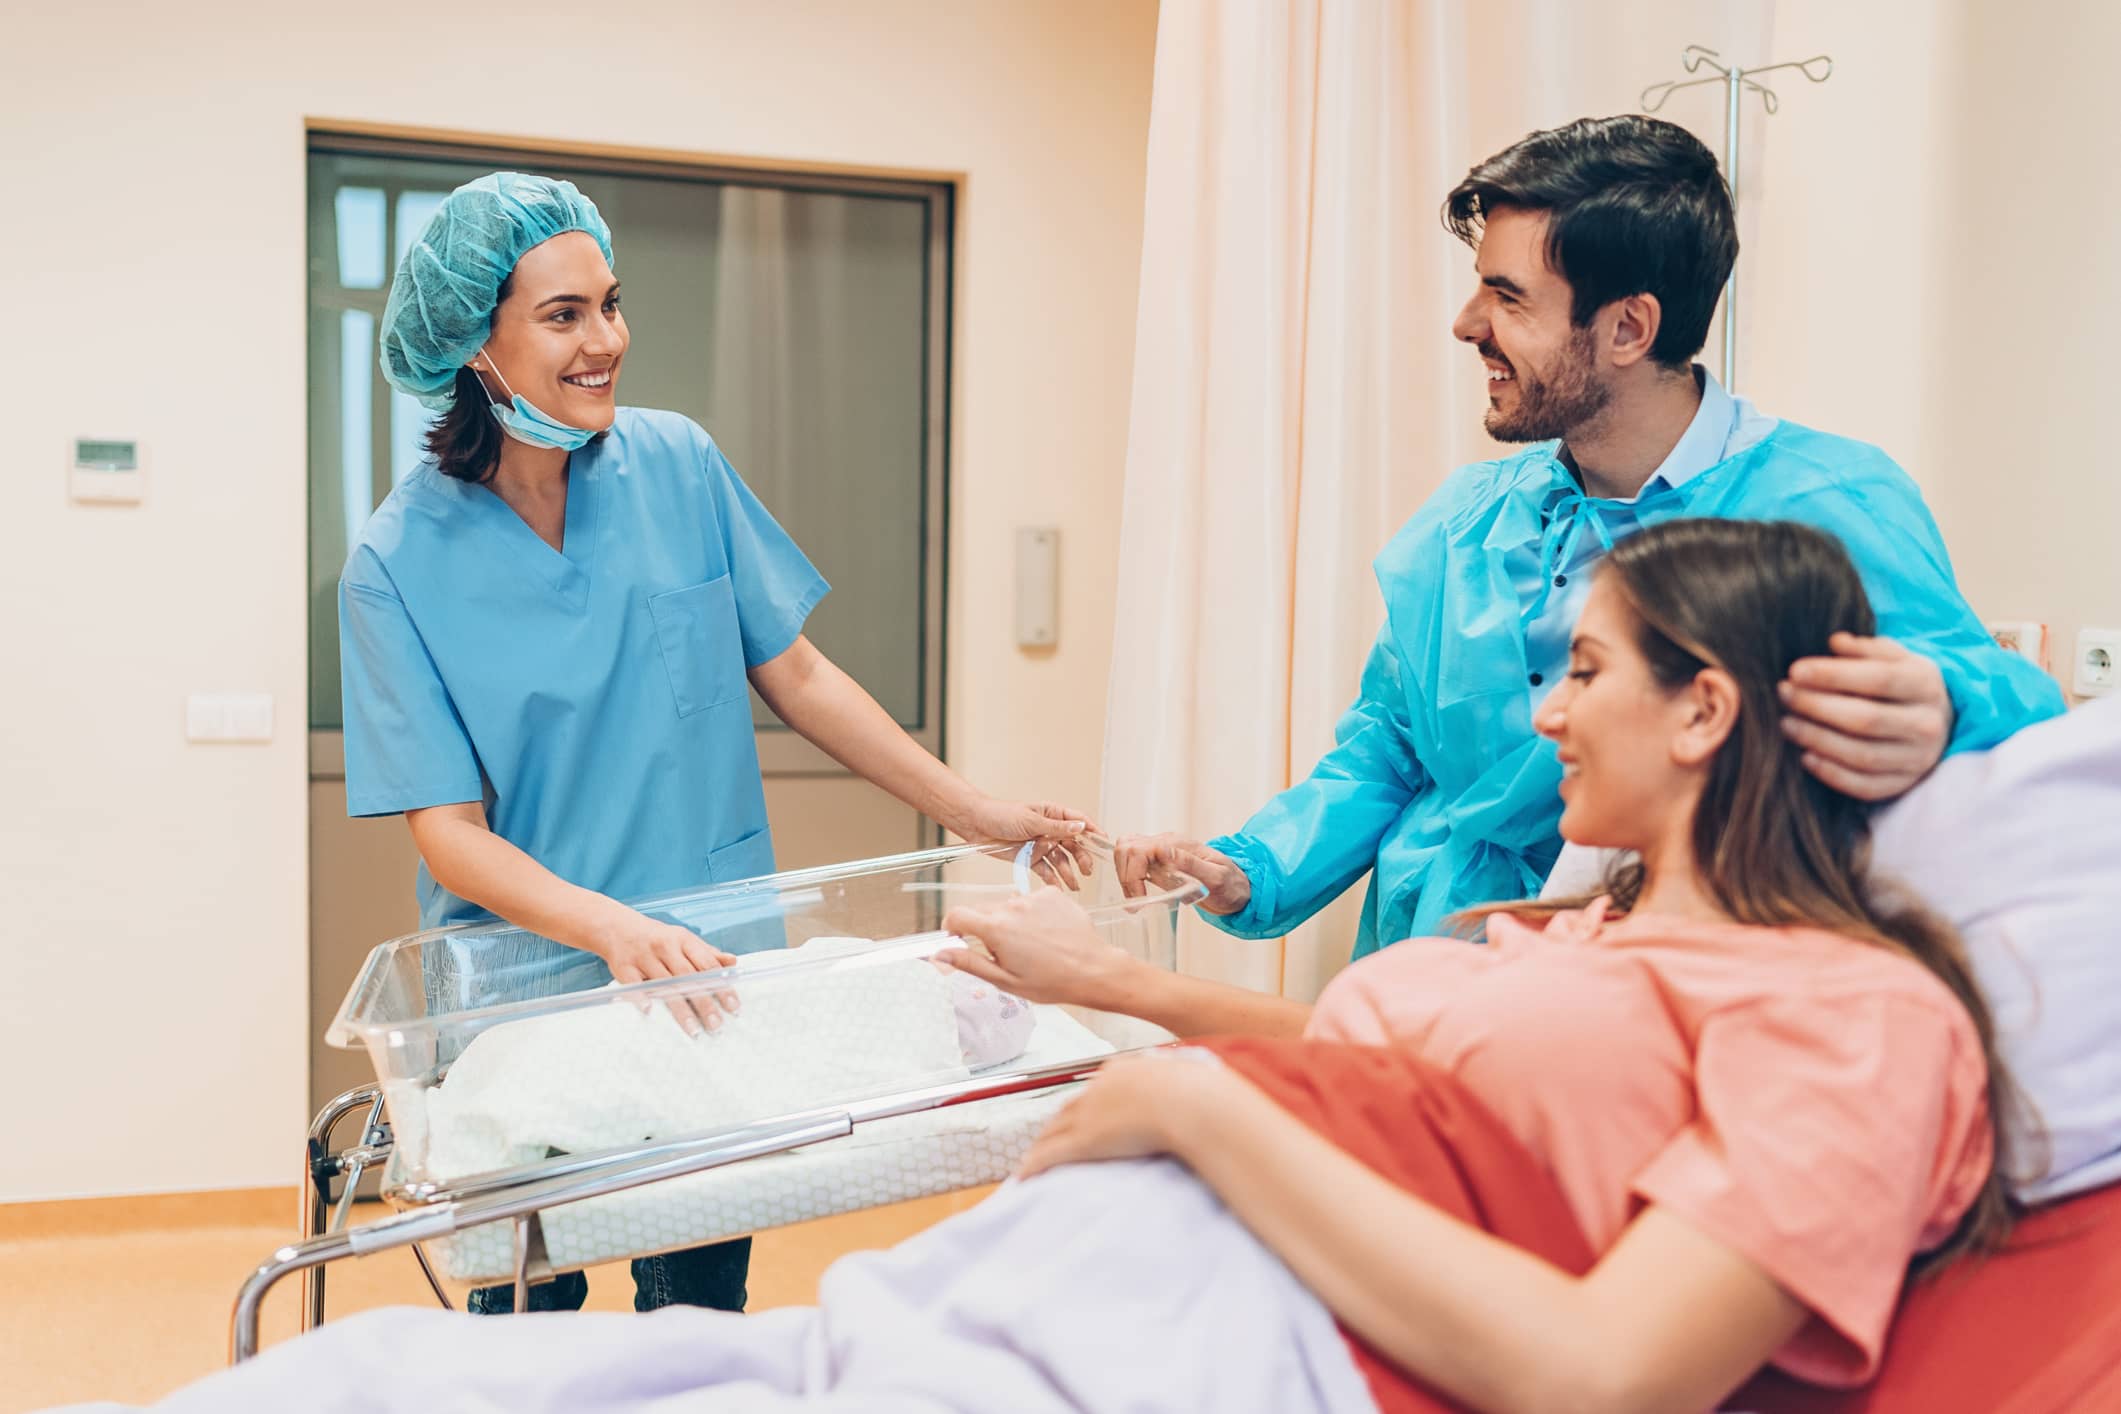 Why Choose the Labor & Delivery Nursing Specialty